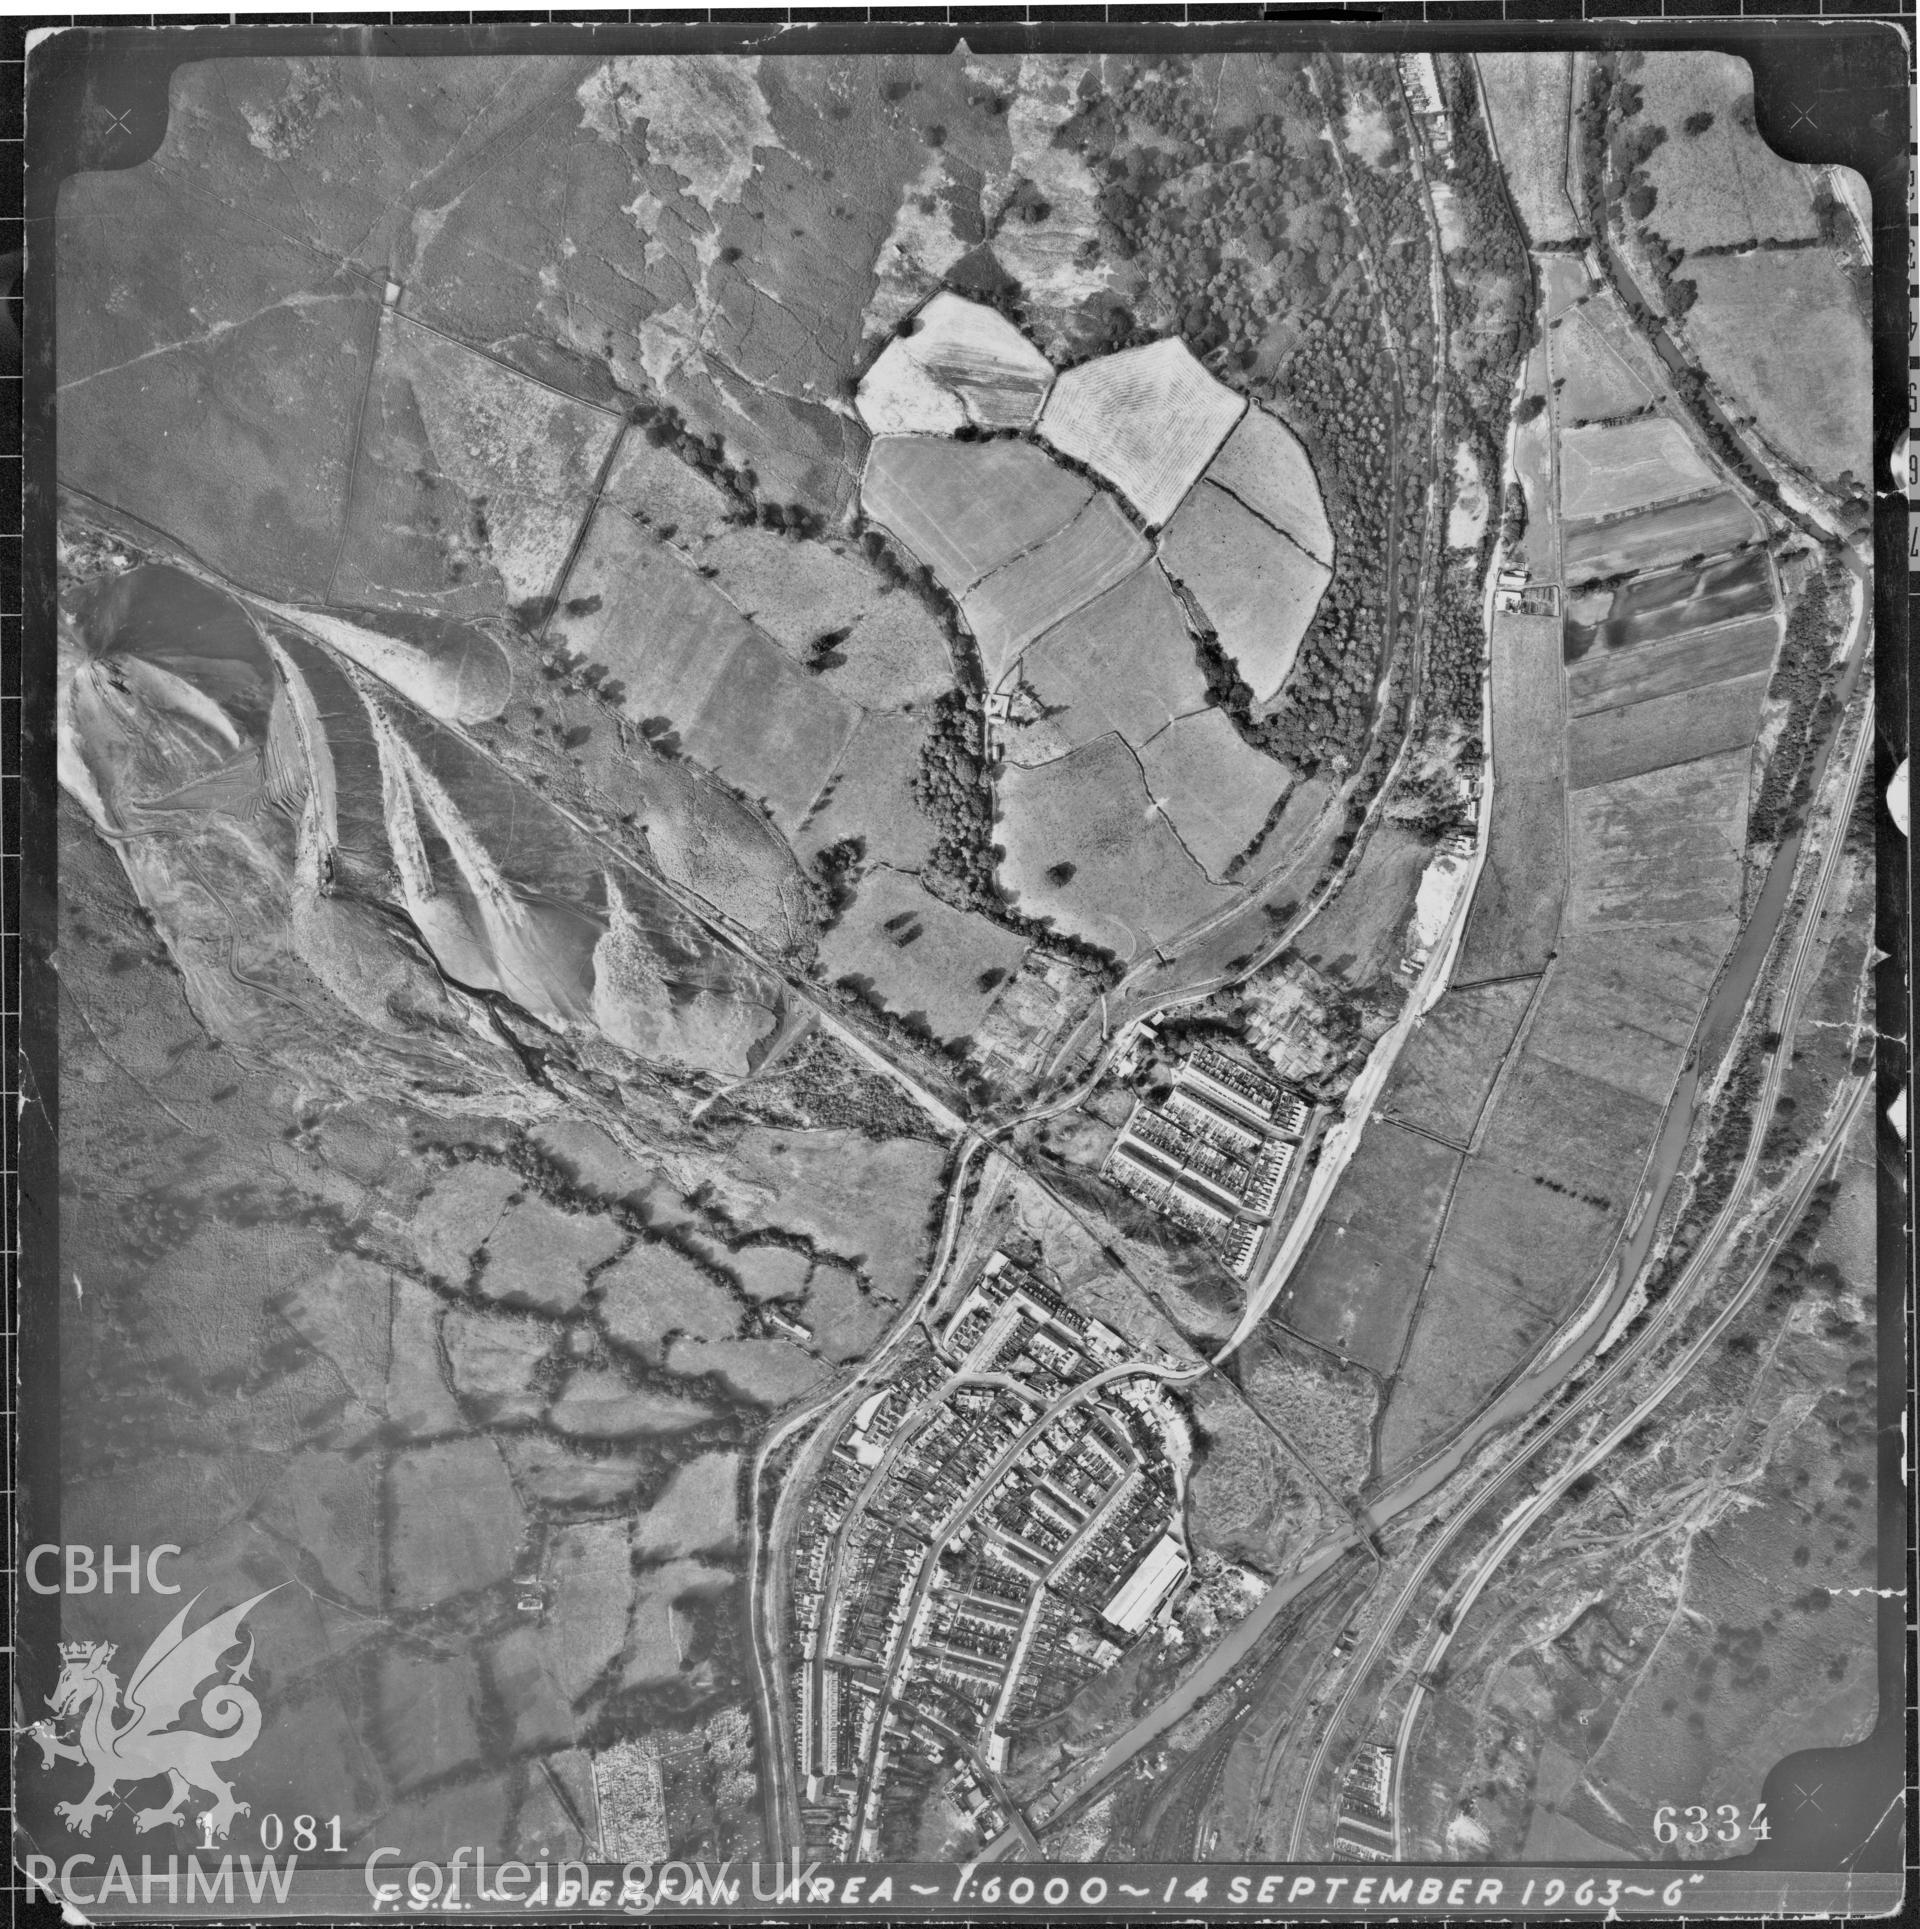 Digitized copy of a black and white aerial photograph showing the Aberfan area, taken by Ordnance Survey, 14th September 1963.